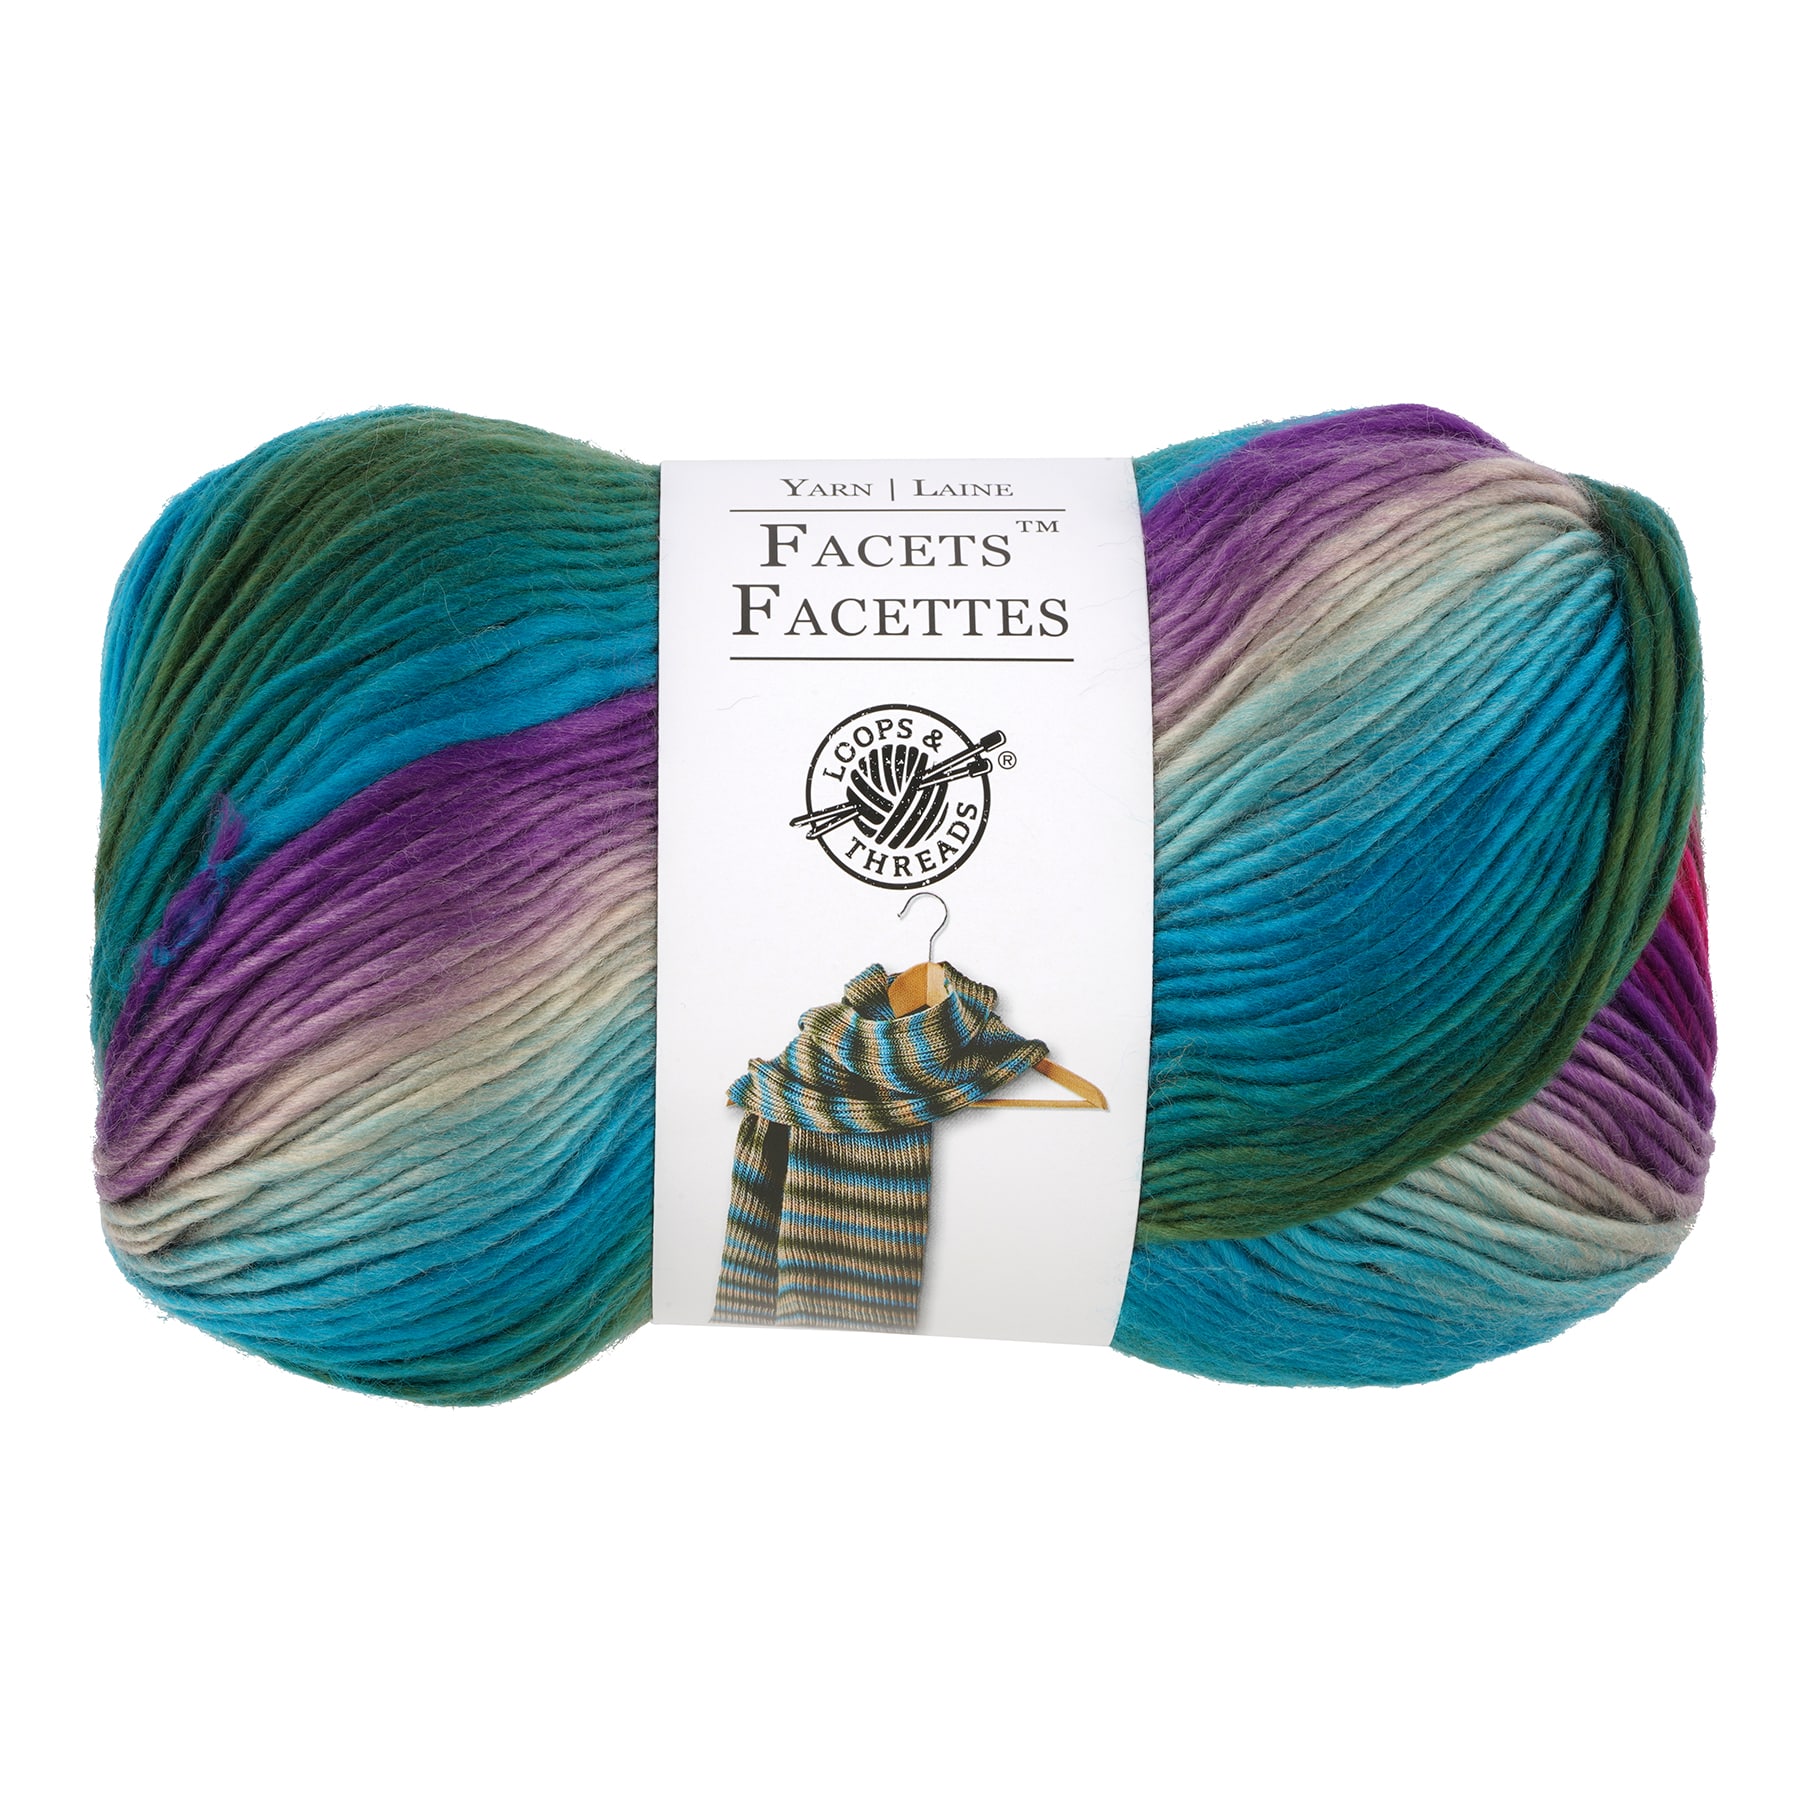 This yarn is so pretty and squishy 🧶 Loops & Threads Facets in